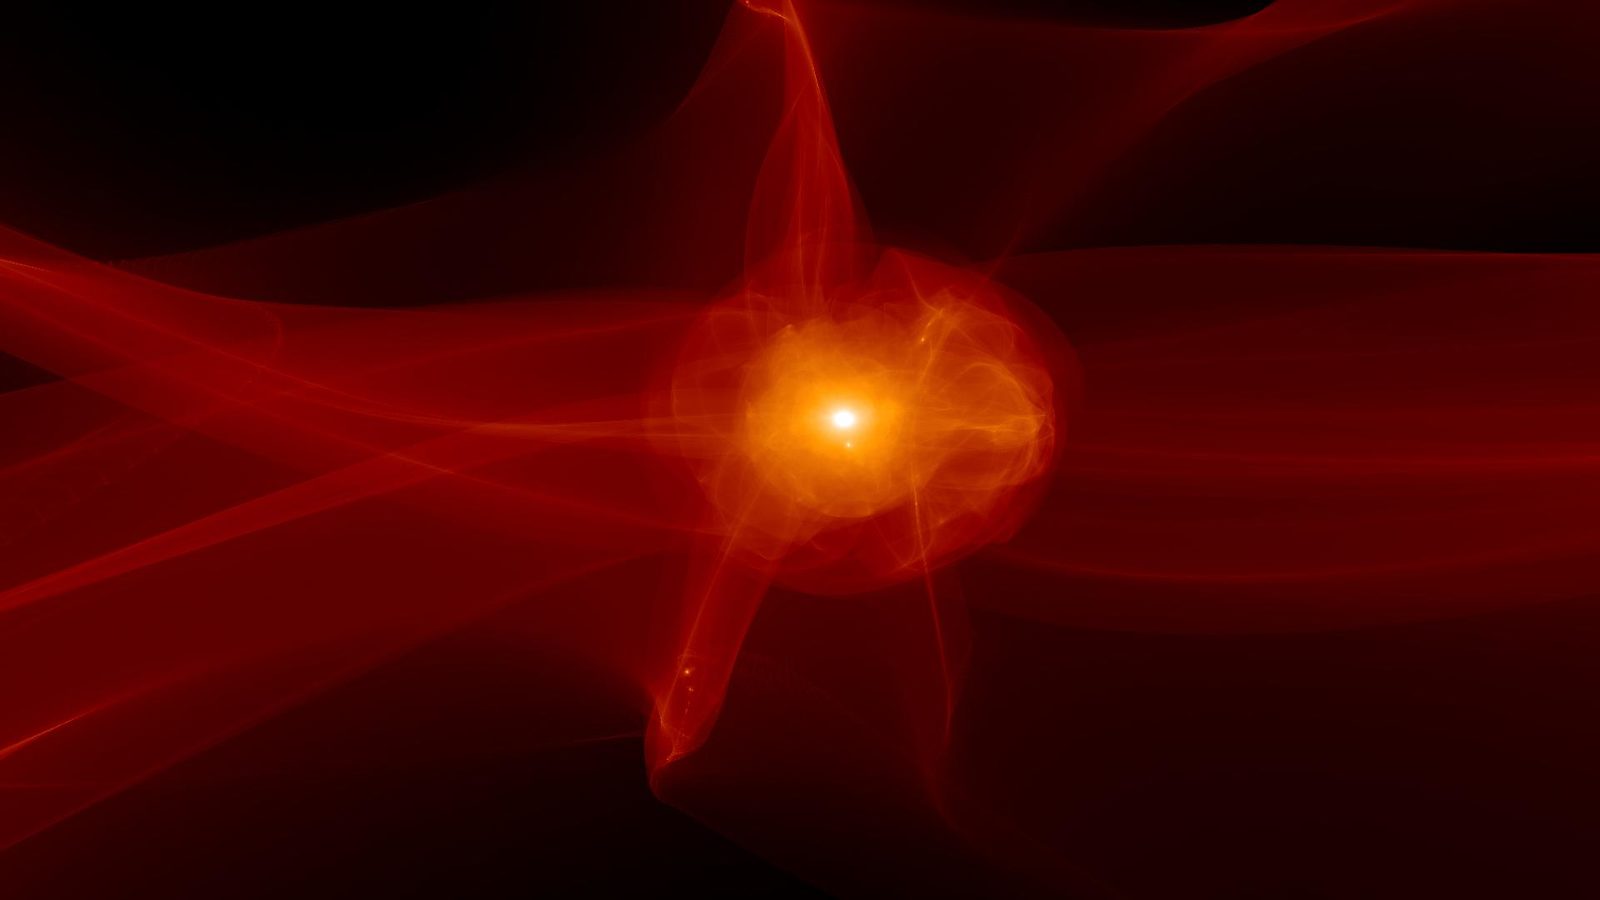 A rendering of a dark matter halo